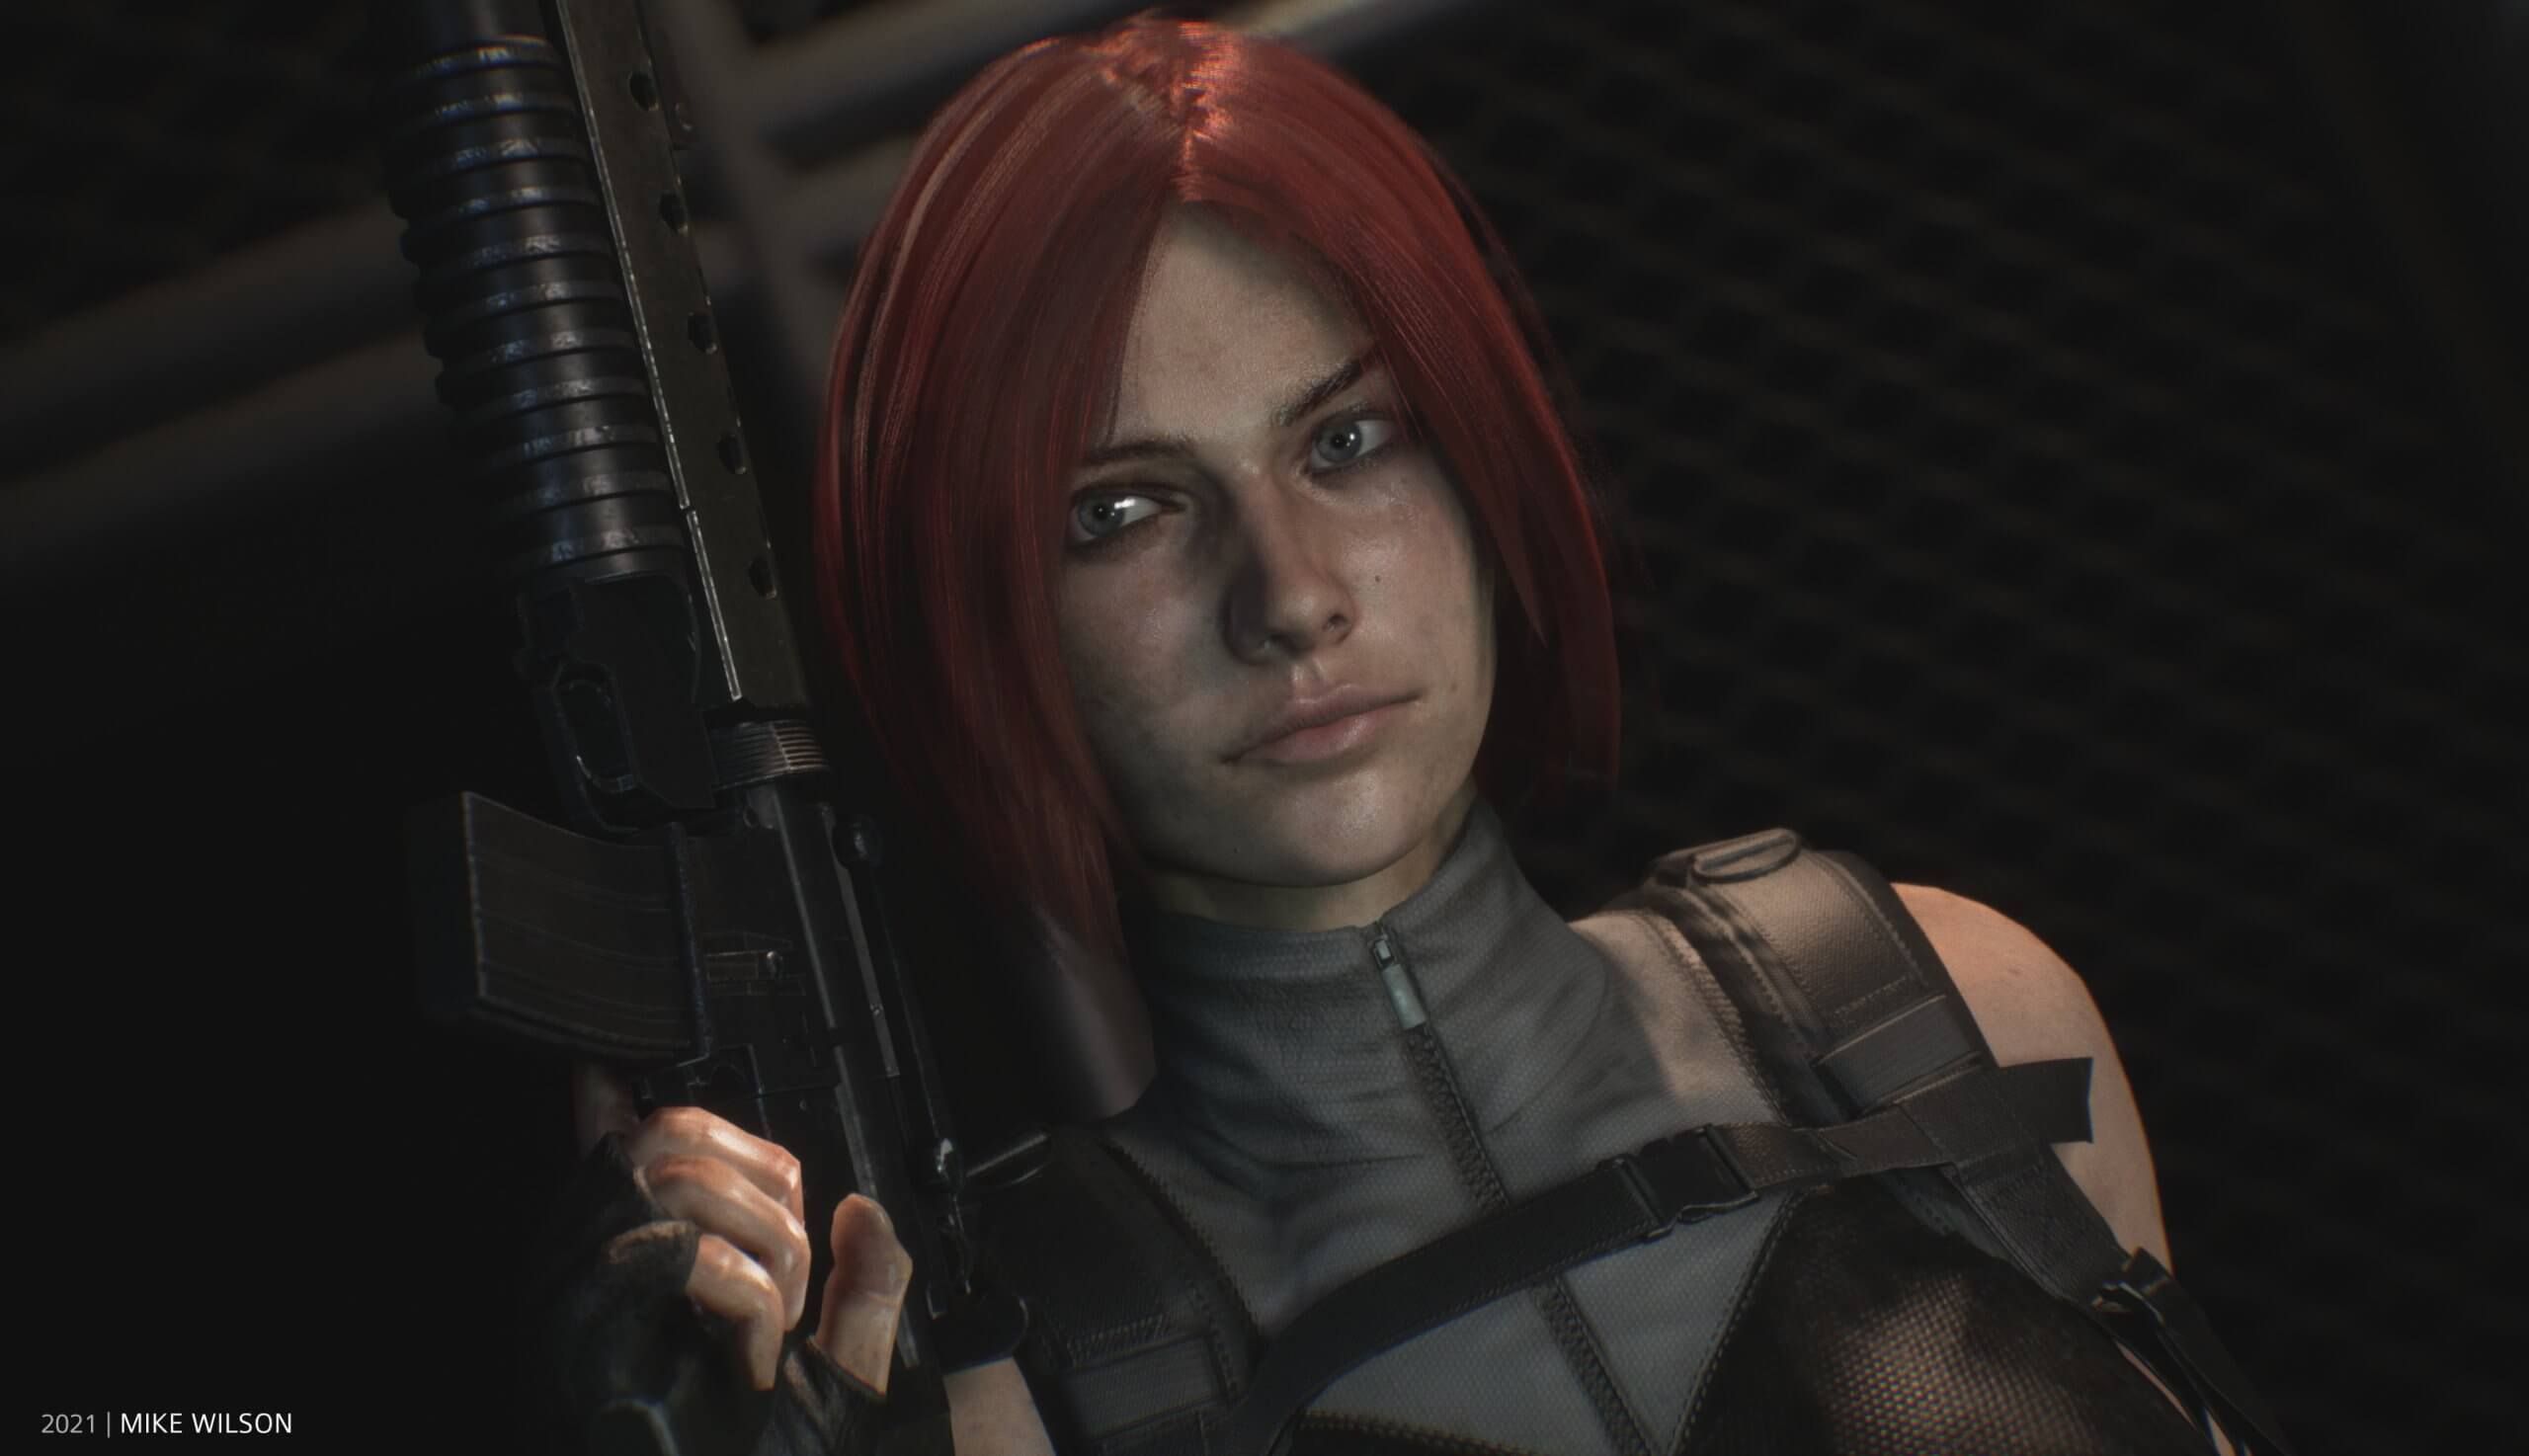 Regina from Dino Crisis Gets a Stunning Unreal Engine 5 Remake